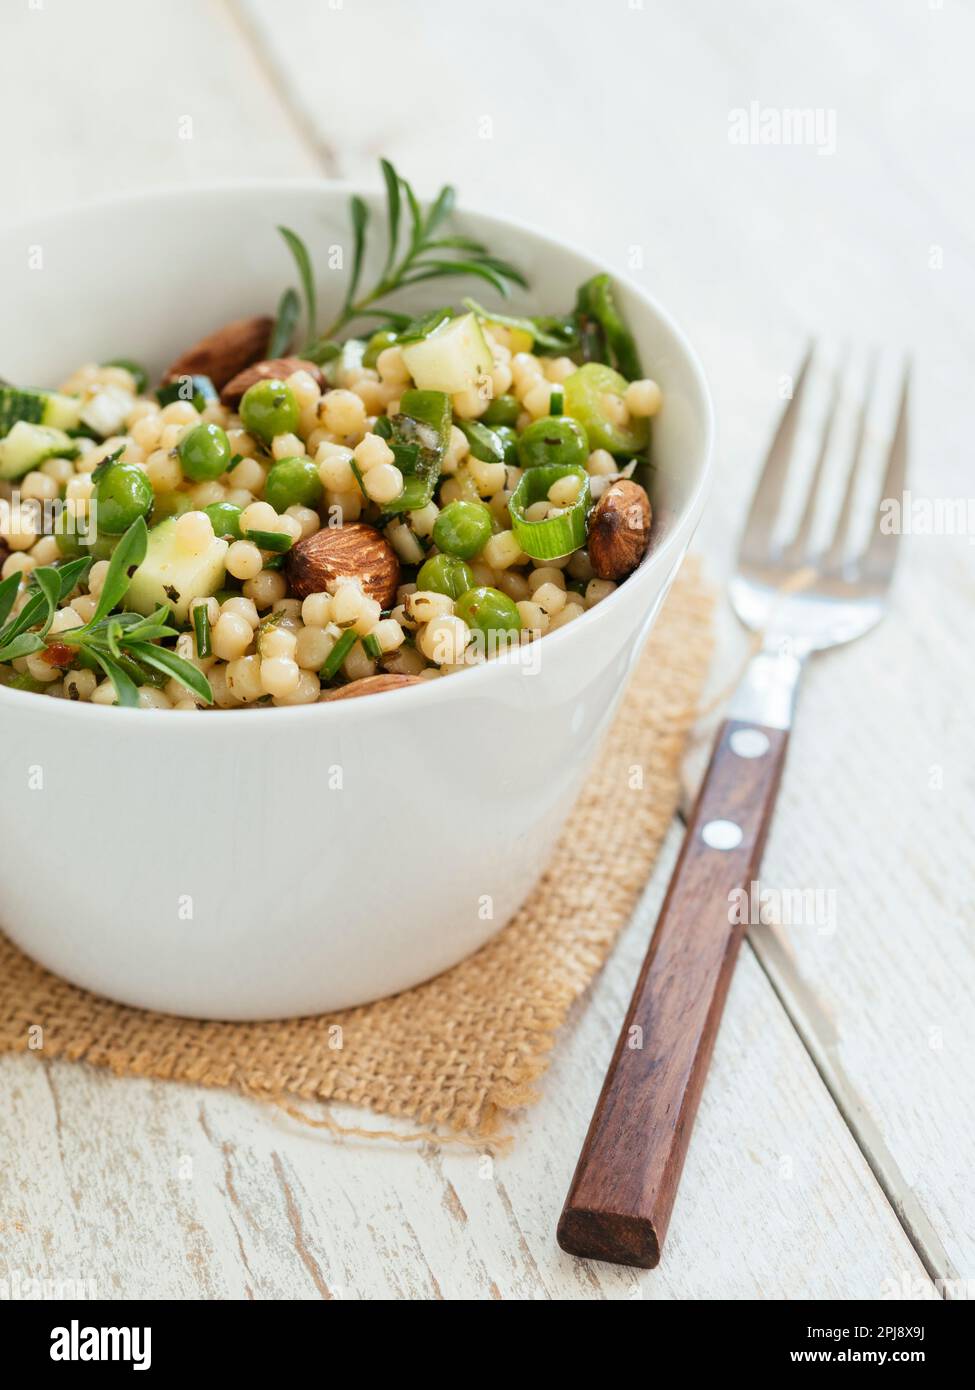 Bowl with a pearl couscous salad with peas, zucchini and almonds. Stock Photo